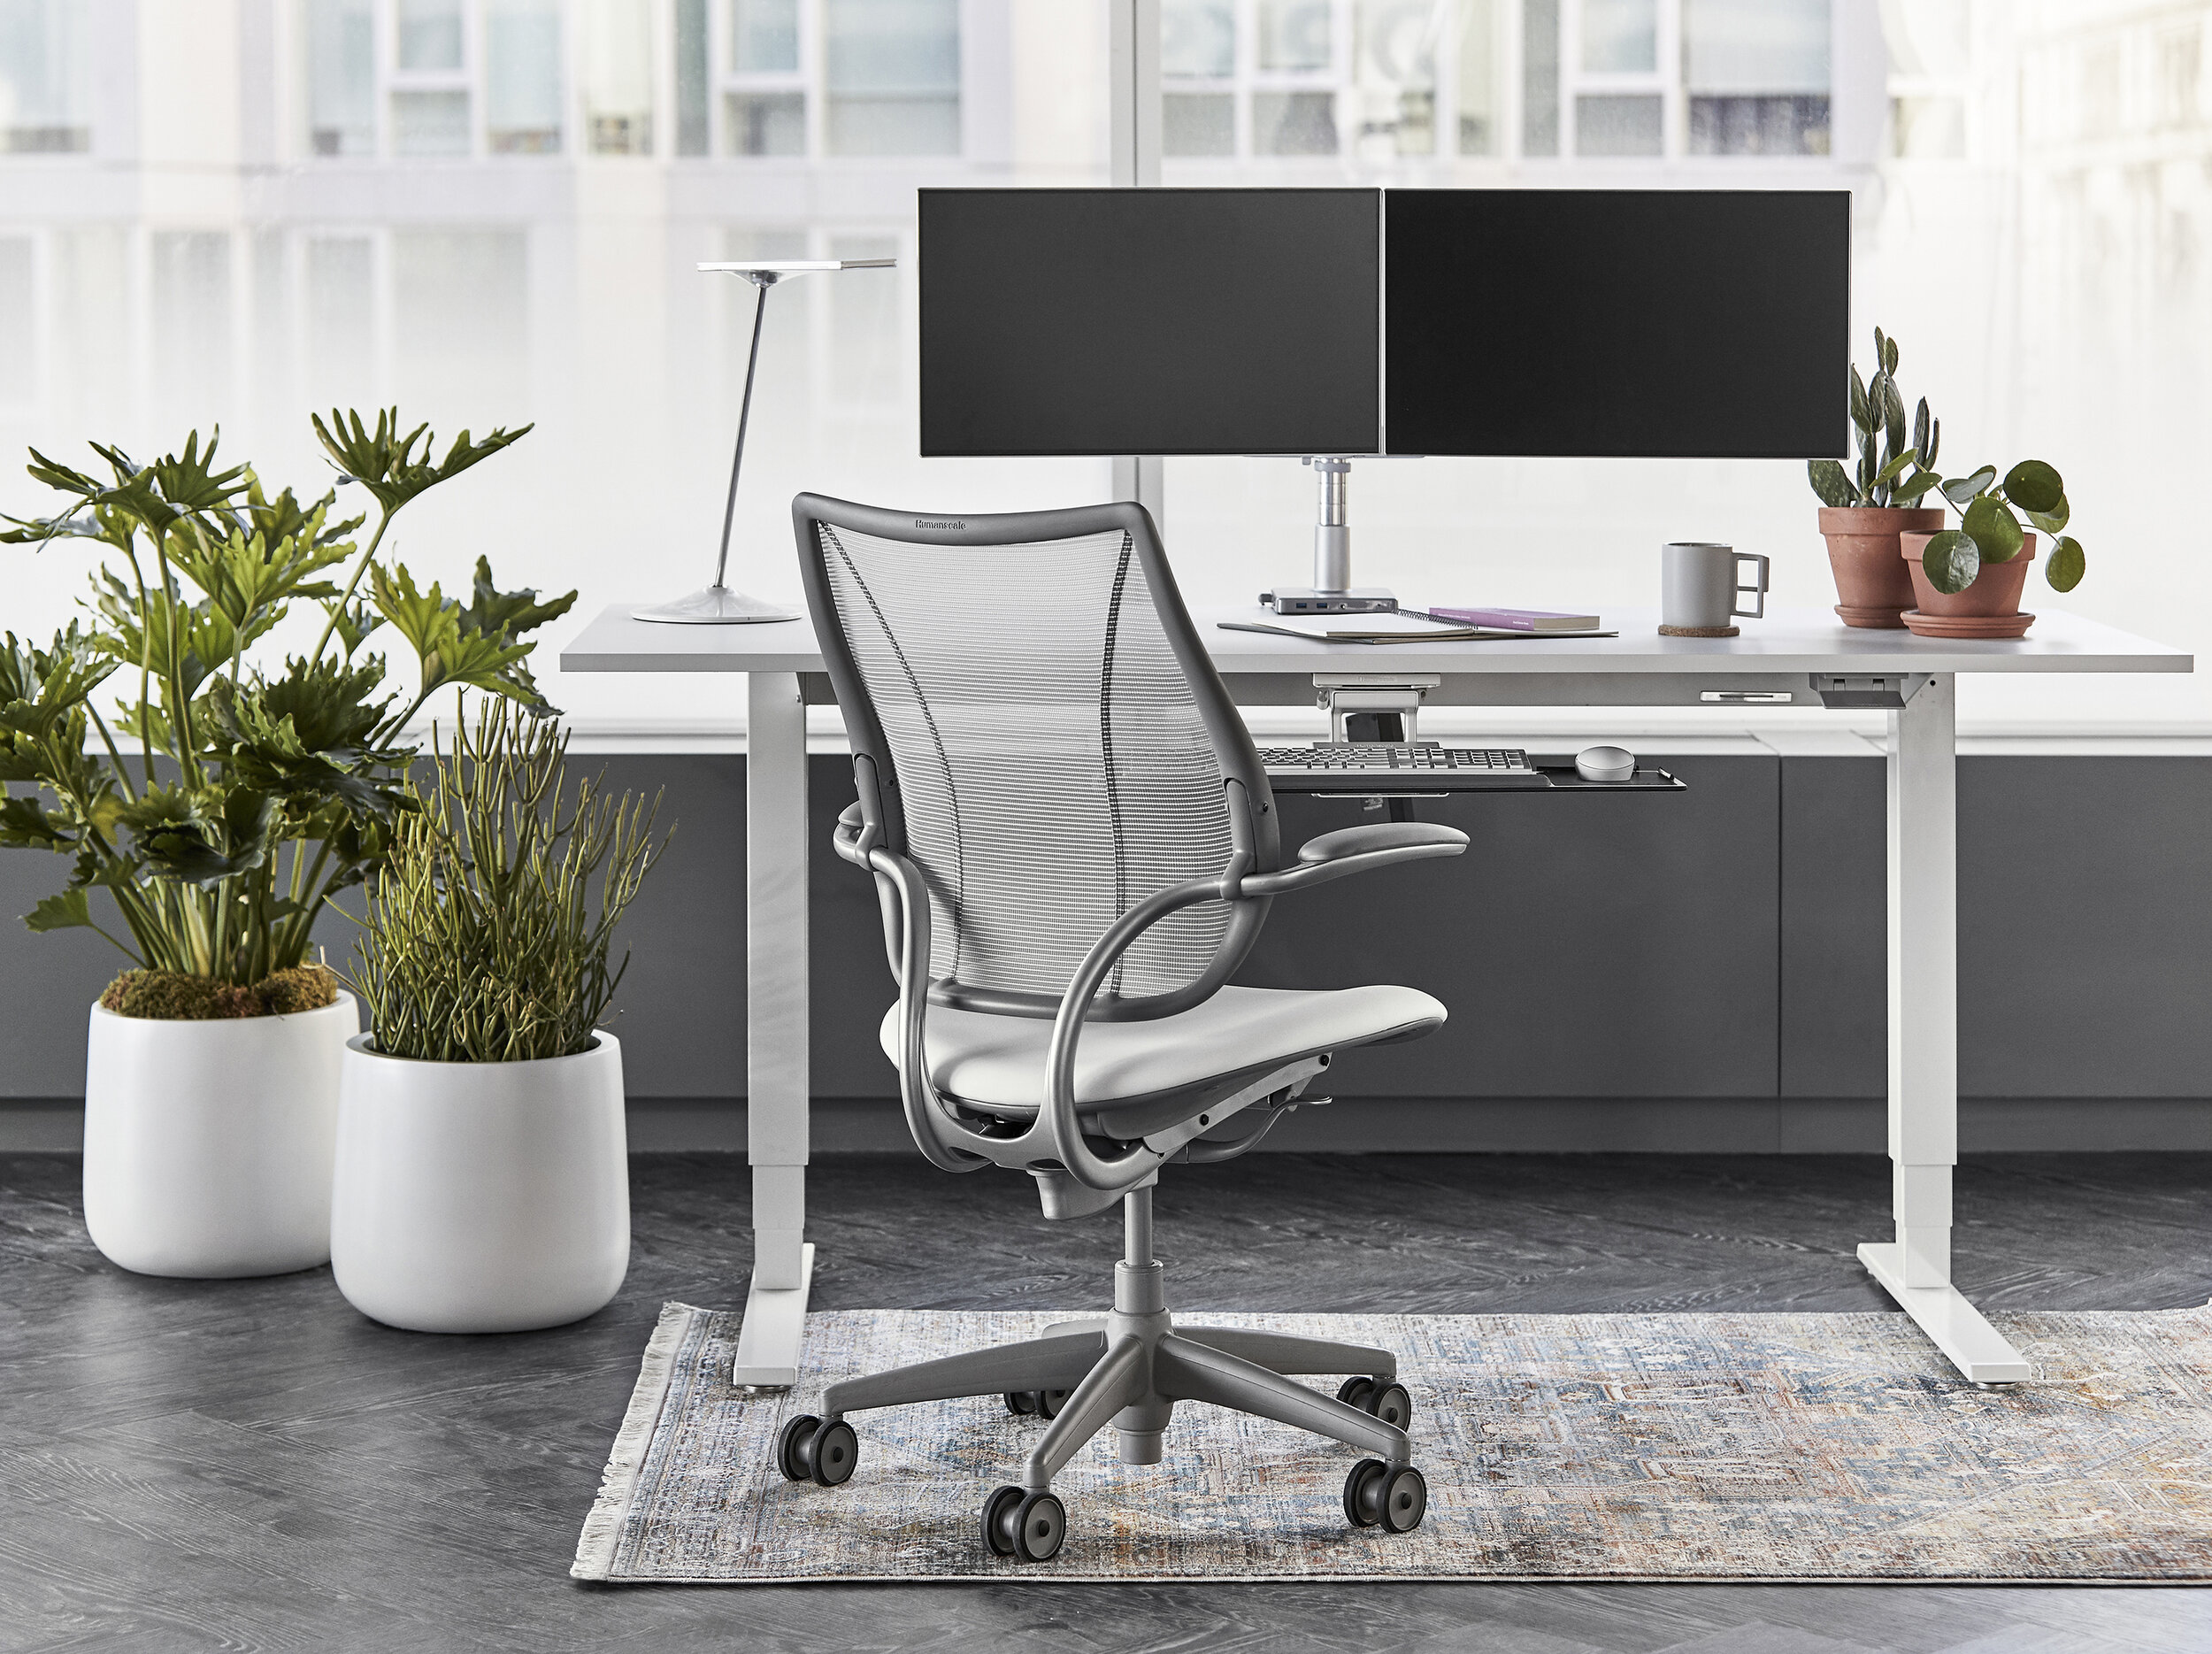 Humanscale Liberty chair — Commercial furniture solutions | Aspect Furniture